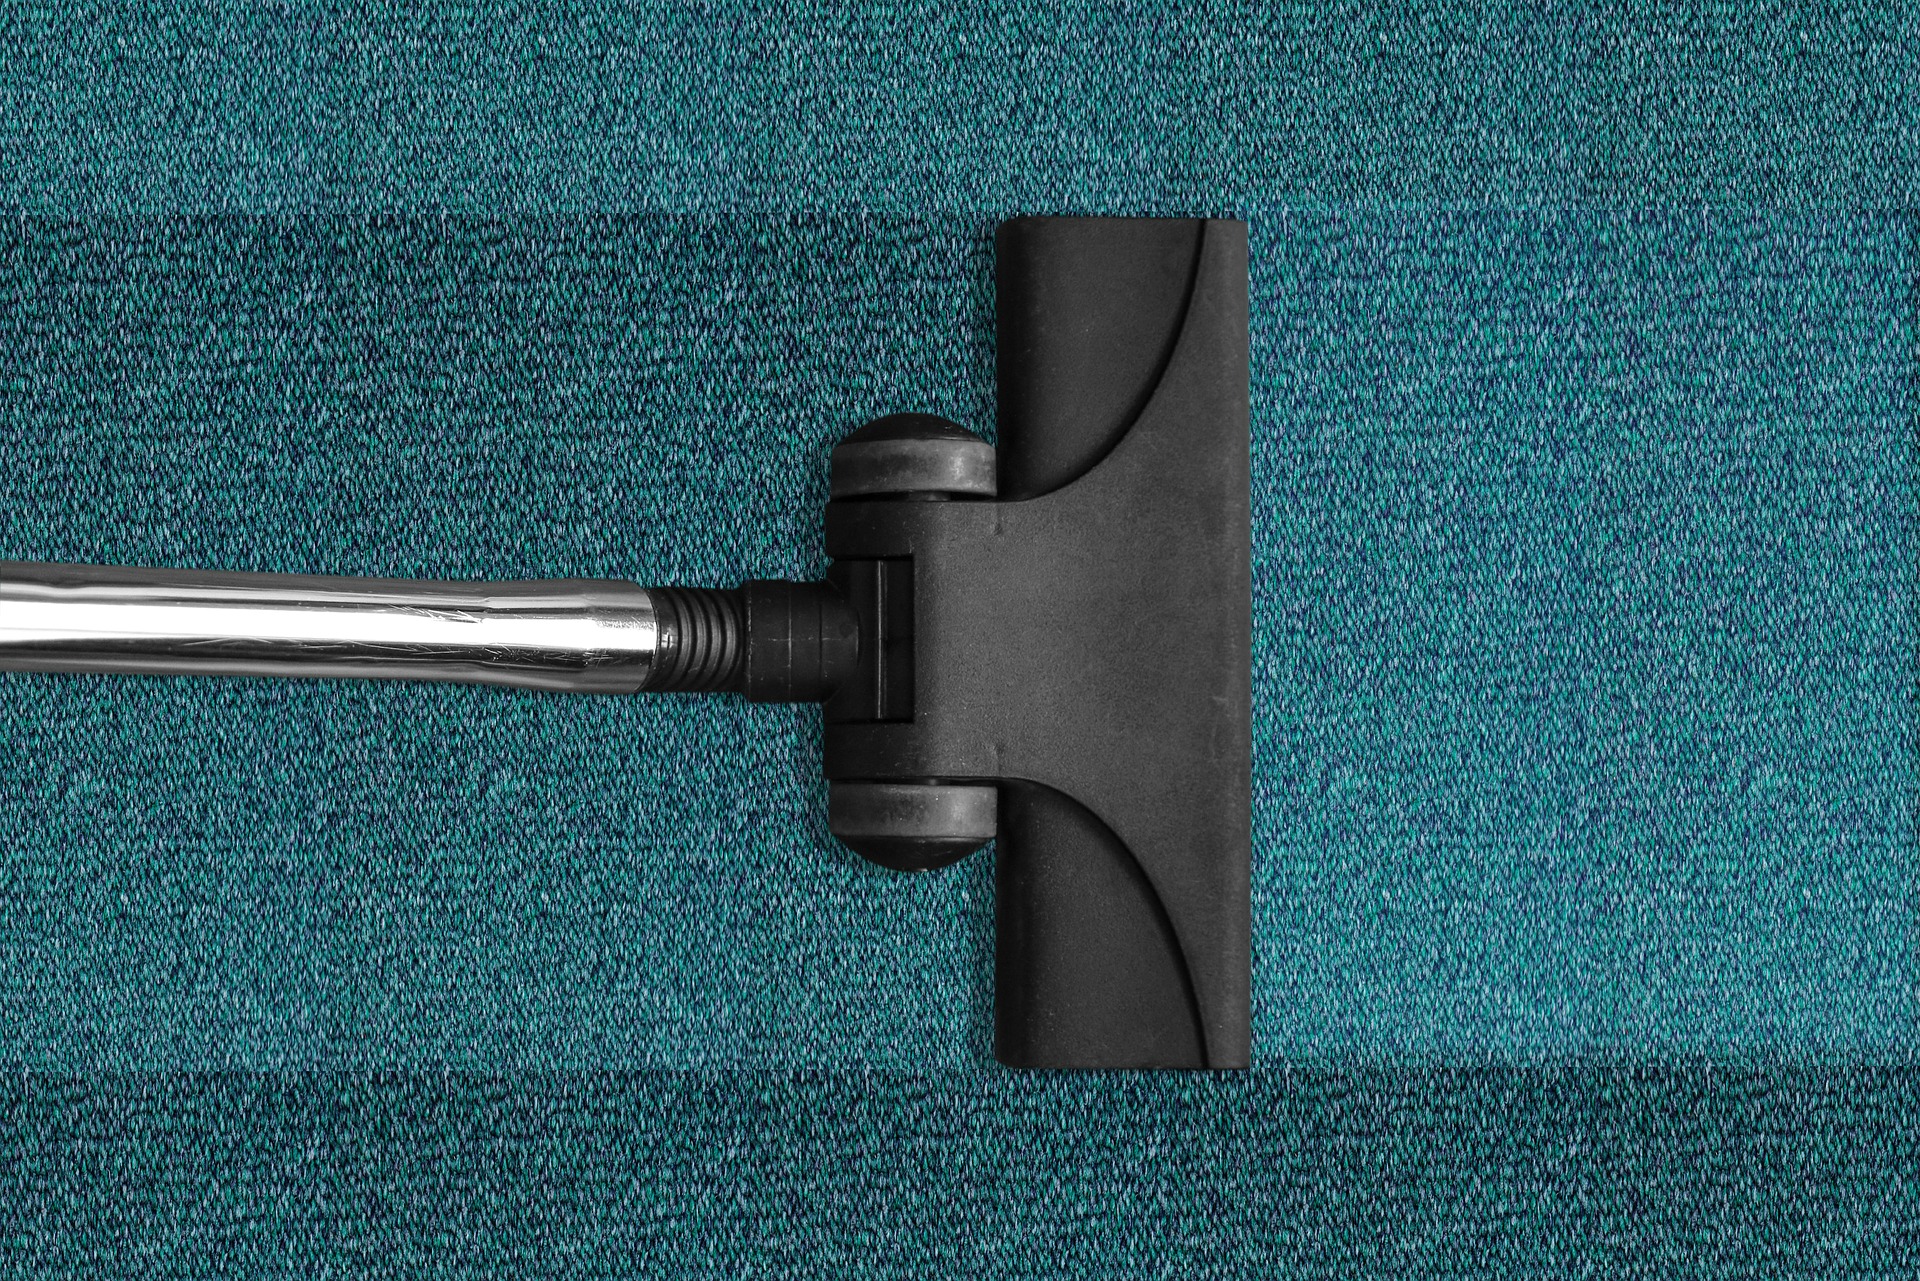 Deep Cleaning Your Upholstery Cleaning